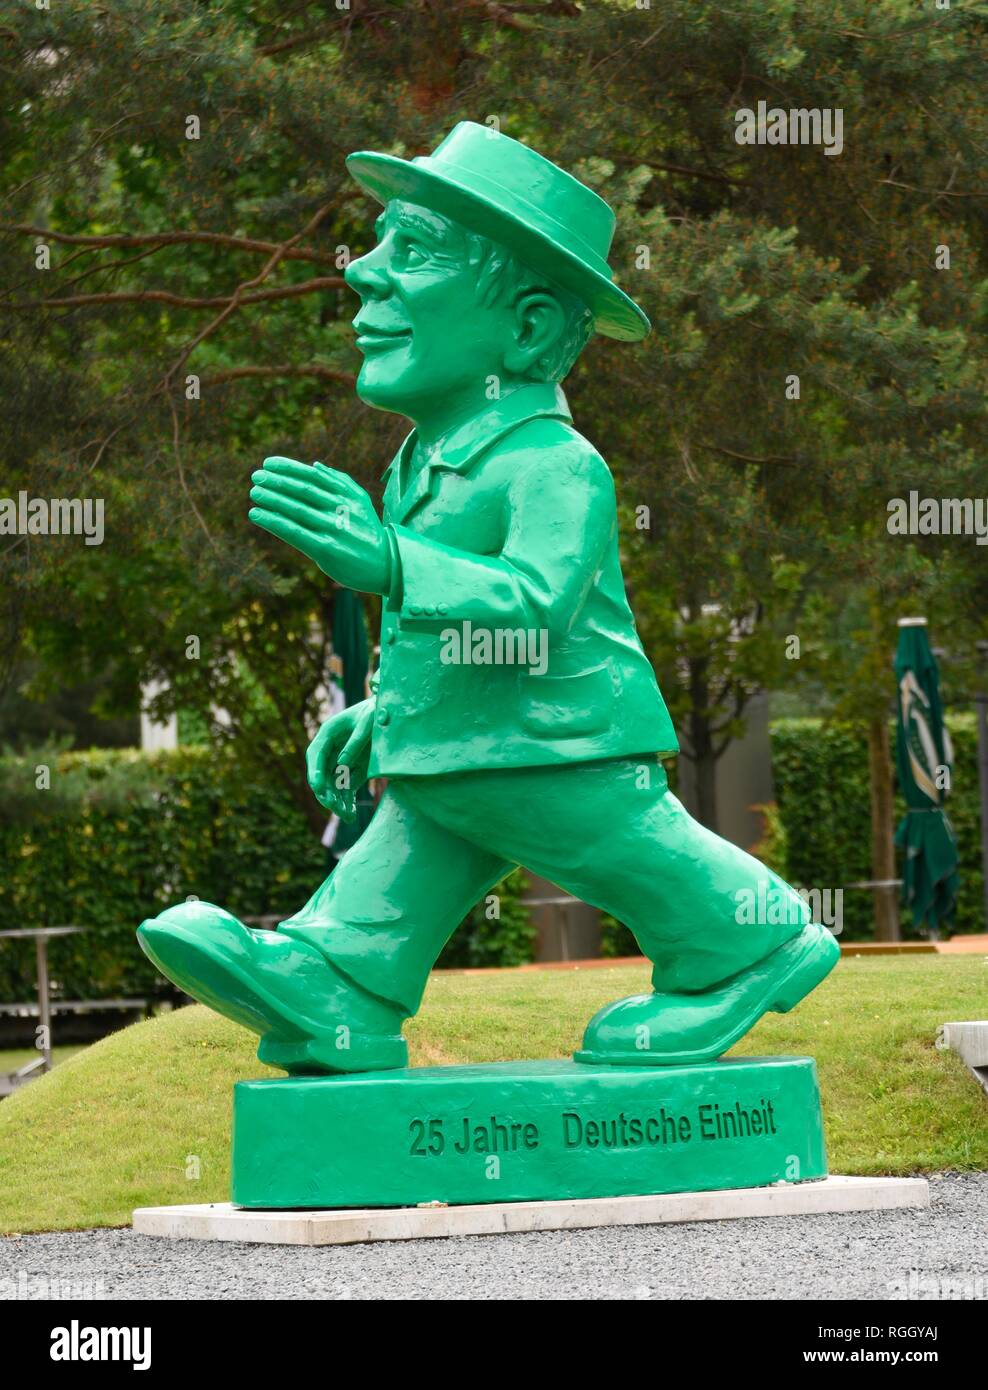 Ampelmann Statue by Ottmar Hörl for the 25th anniversary of the German reunification, Berlin, Germany Stock Photo